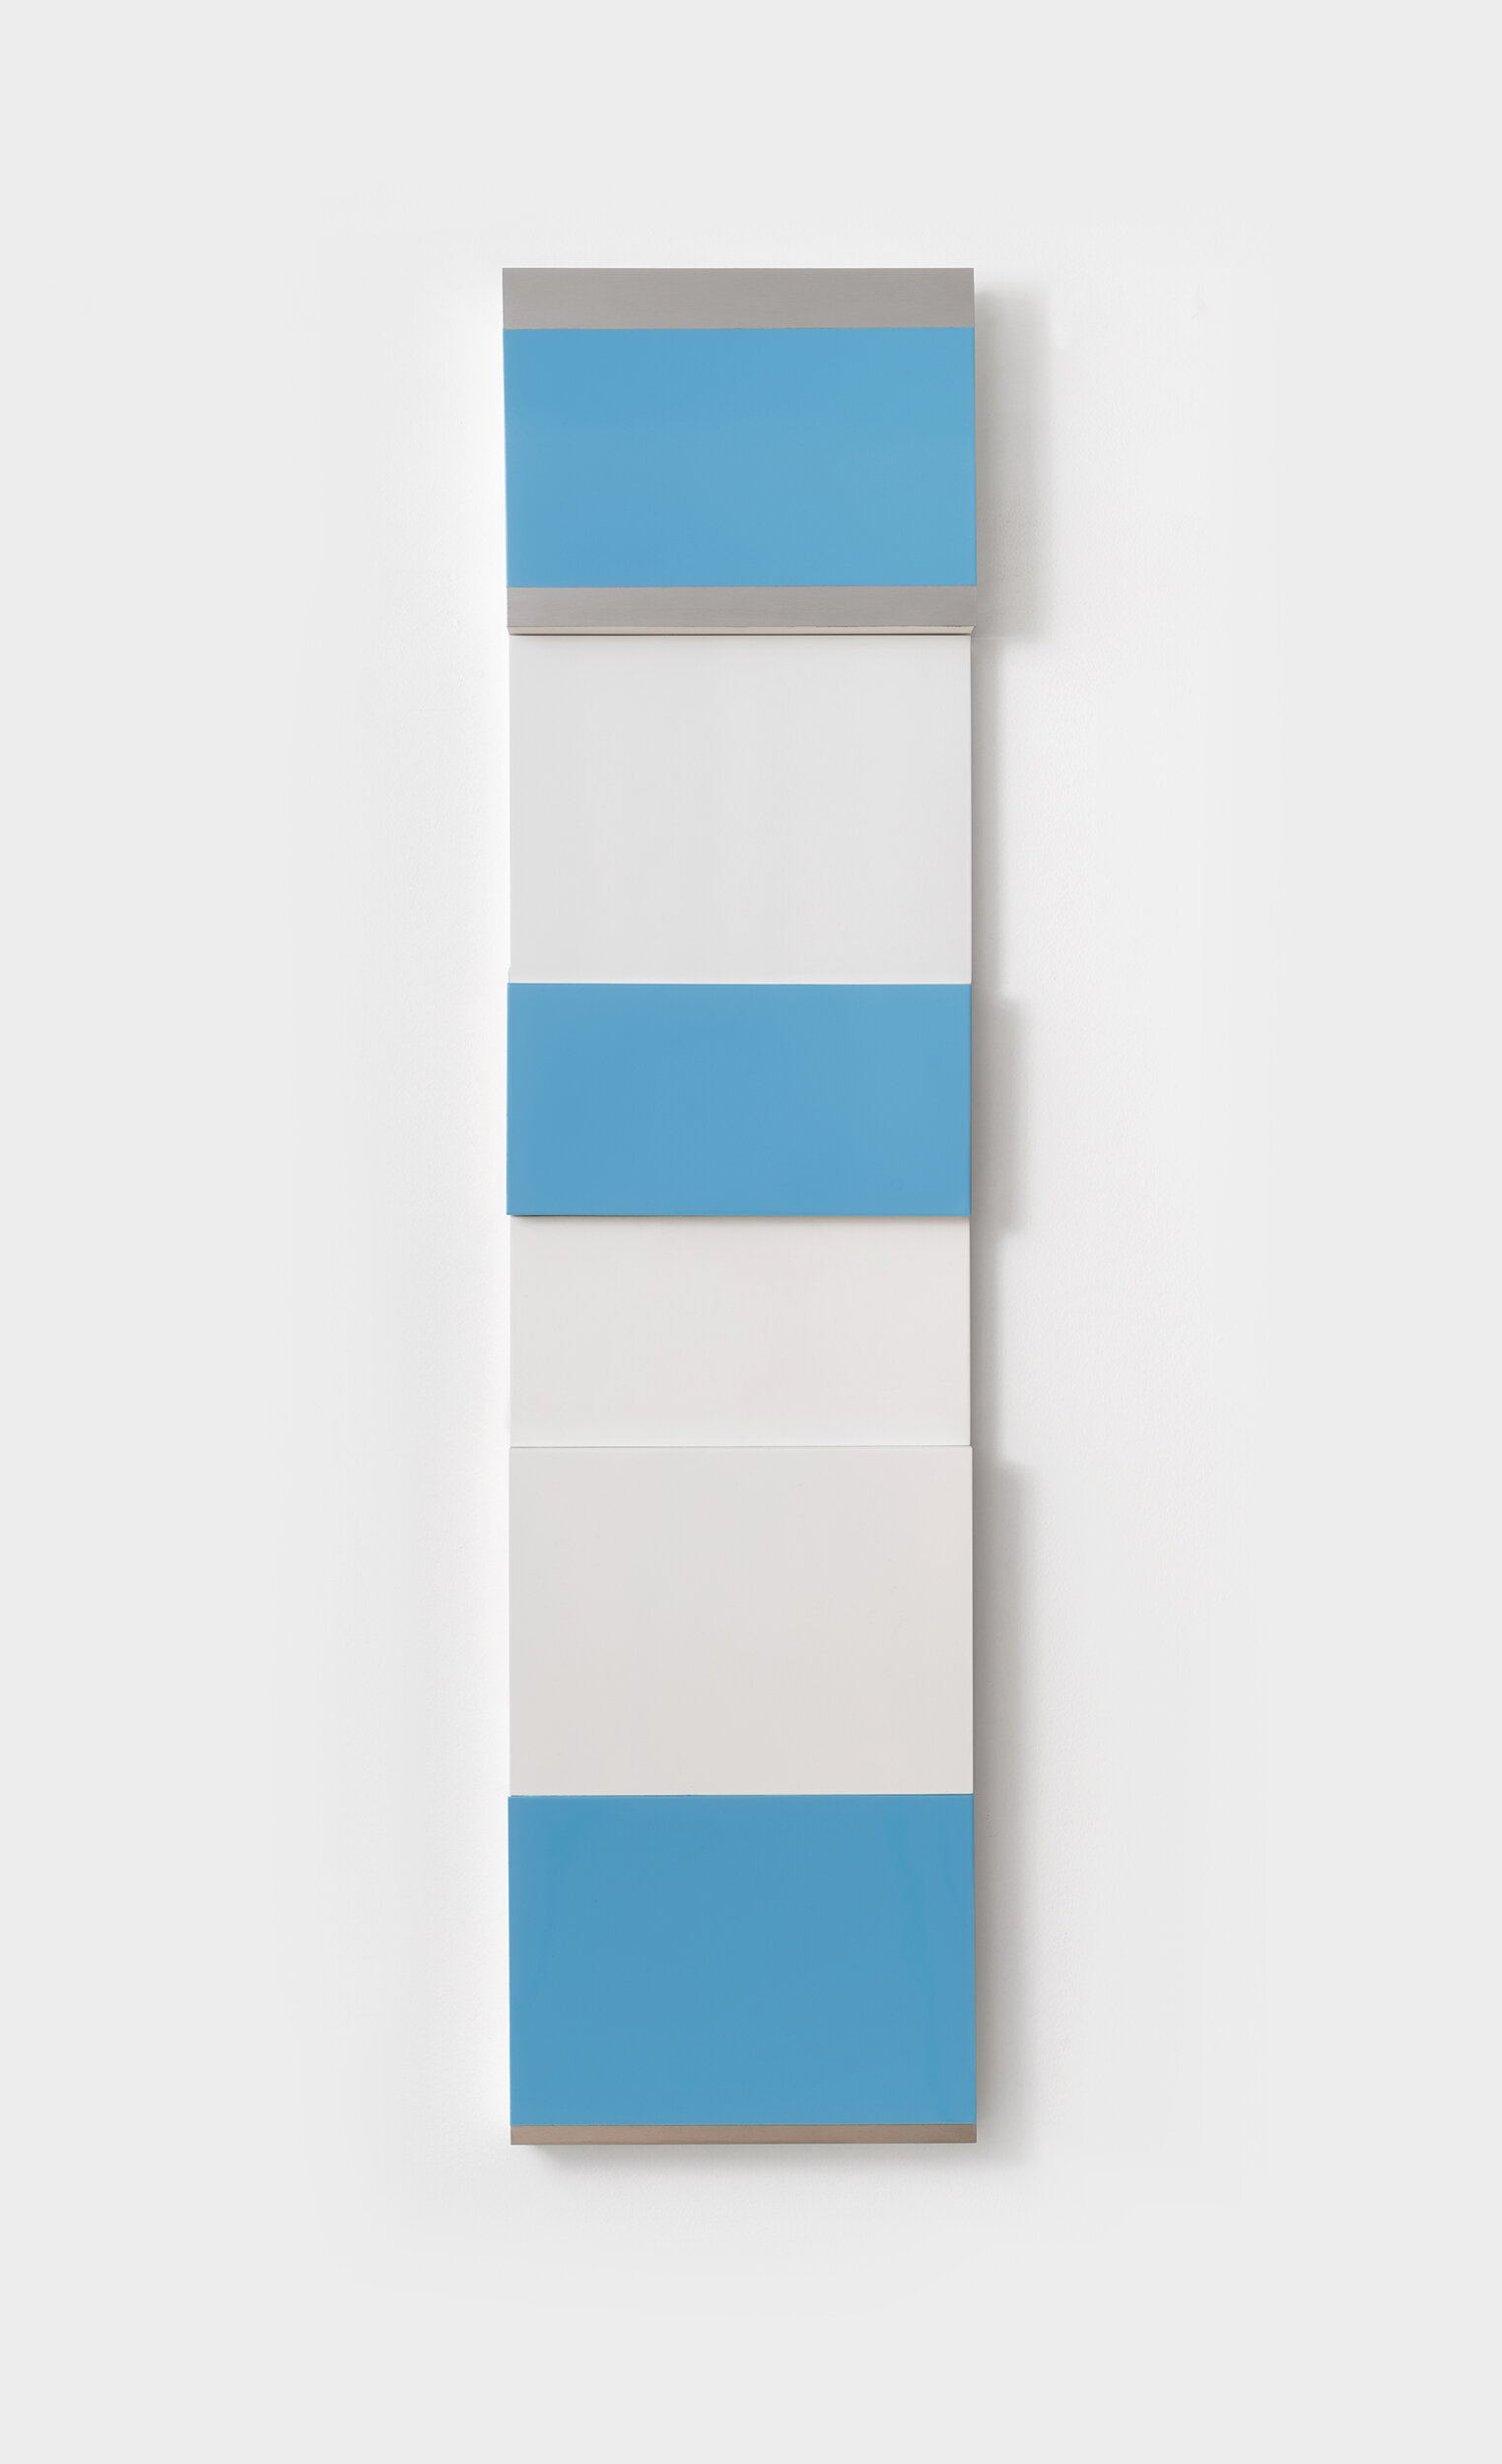 BLUE AND WHITE (2017)